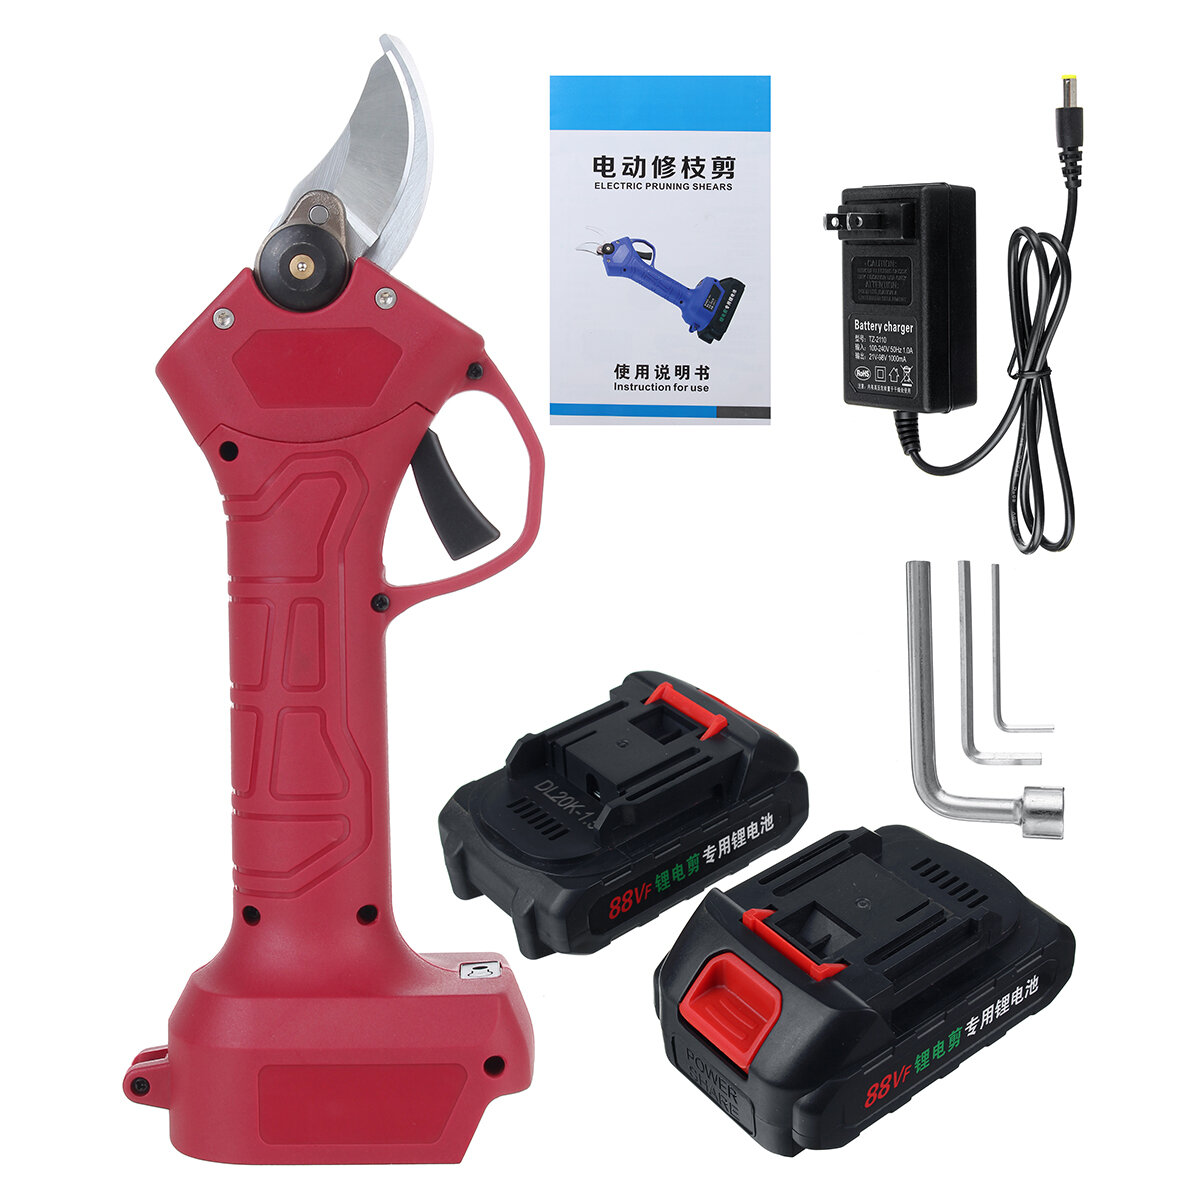 

21V Cordless Rechargeable Electric Pruning Shears Garden Scissor Hedge Trimmer w/ 1pc OR 2pcs Battery